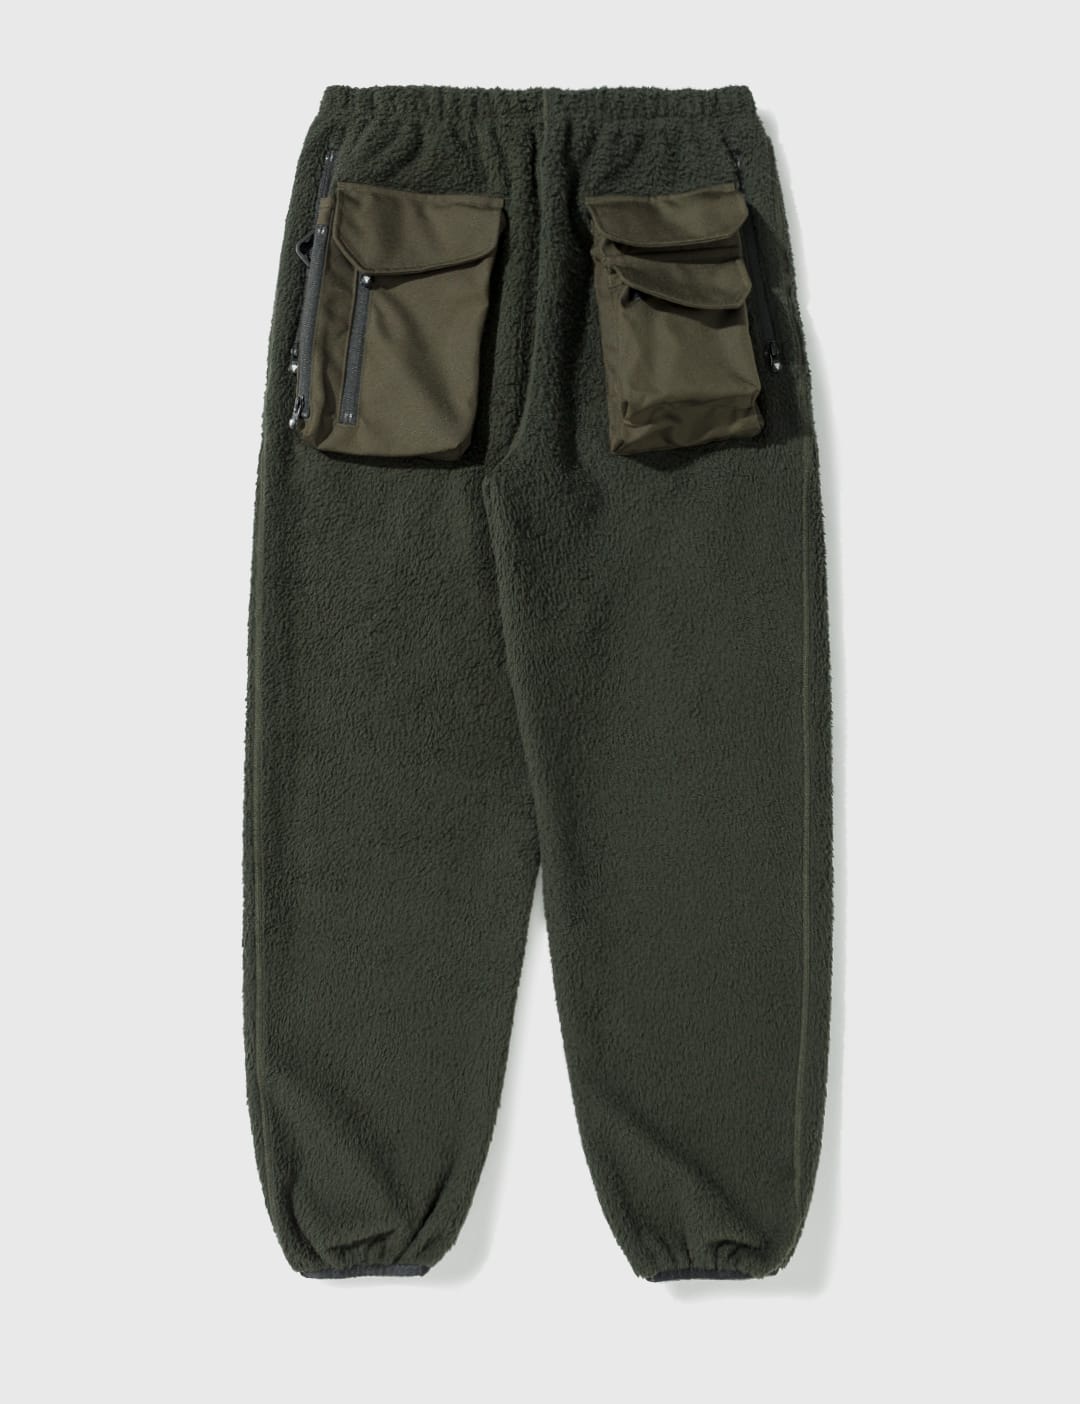 South2 West8 - Tenkara Trout Sweat Pants | HBX - Globally Curated Fashion  and Lifestyle by Hypebeast